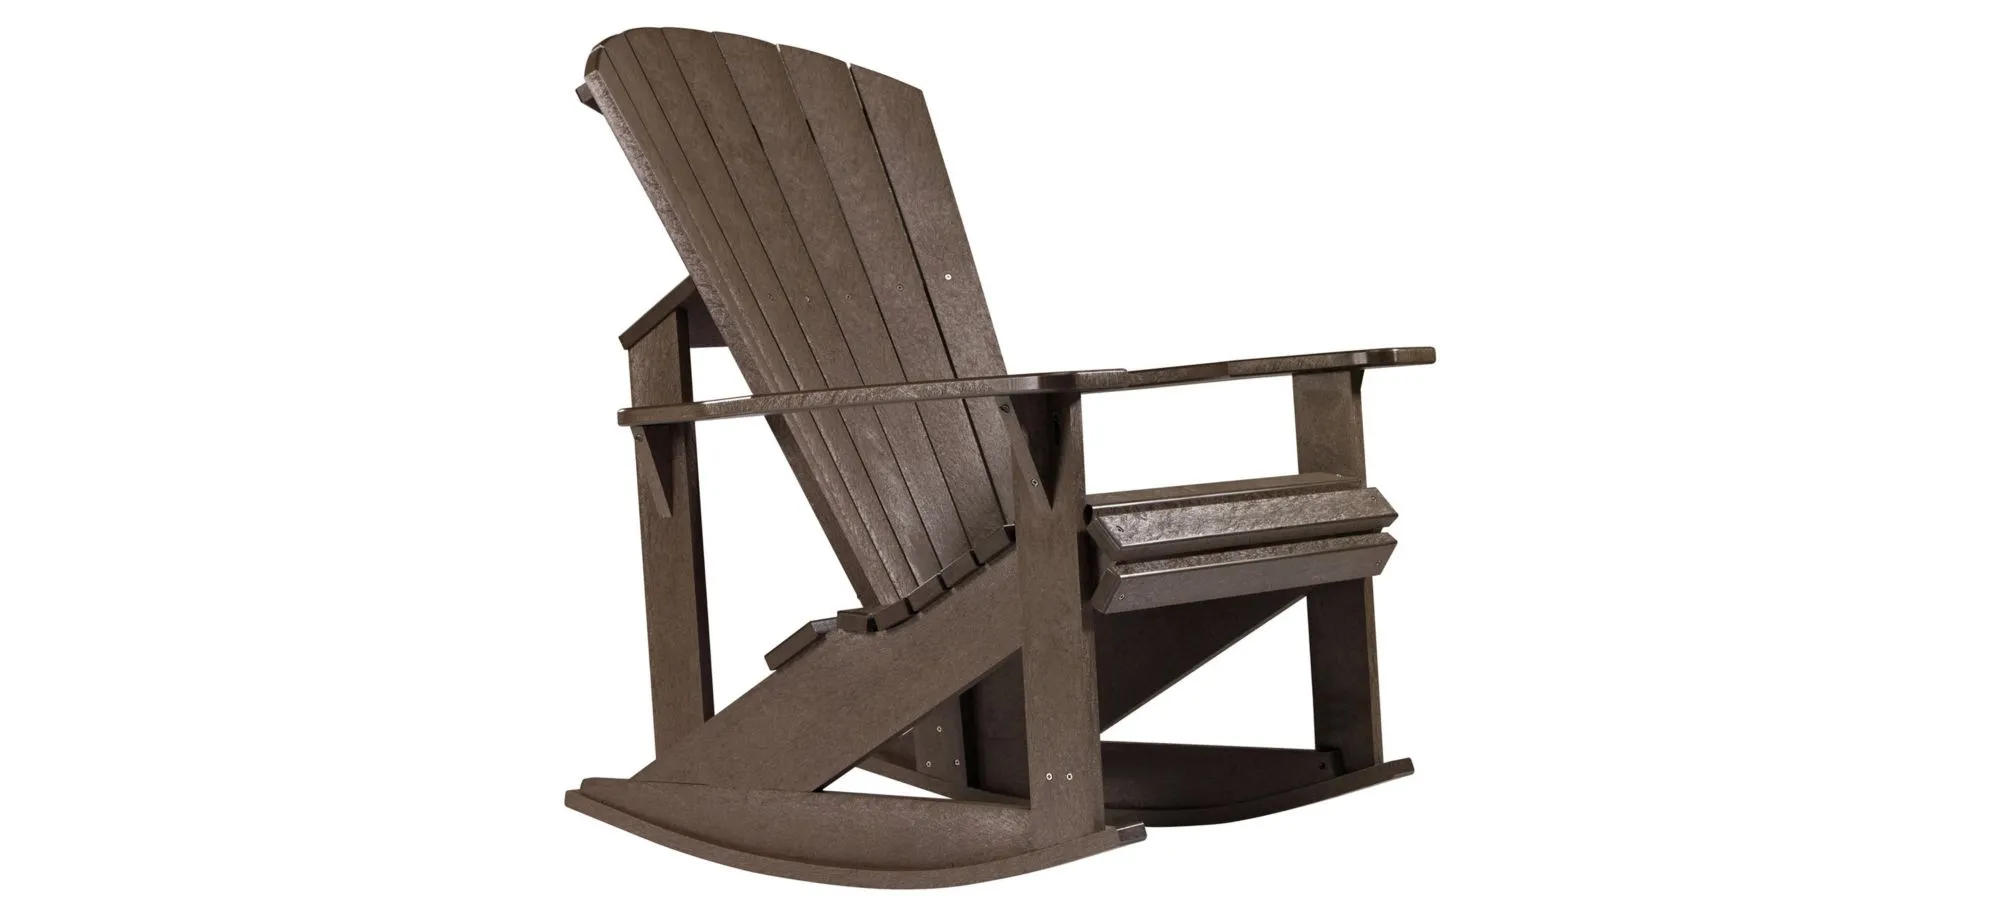 Generations Adirondack Outdoor Rocking Chair in Chocolate by C.R. Plastic Products